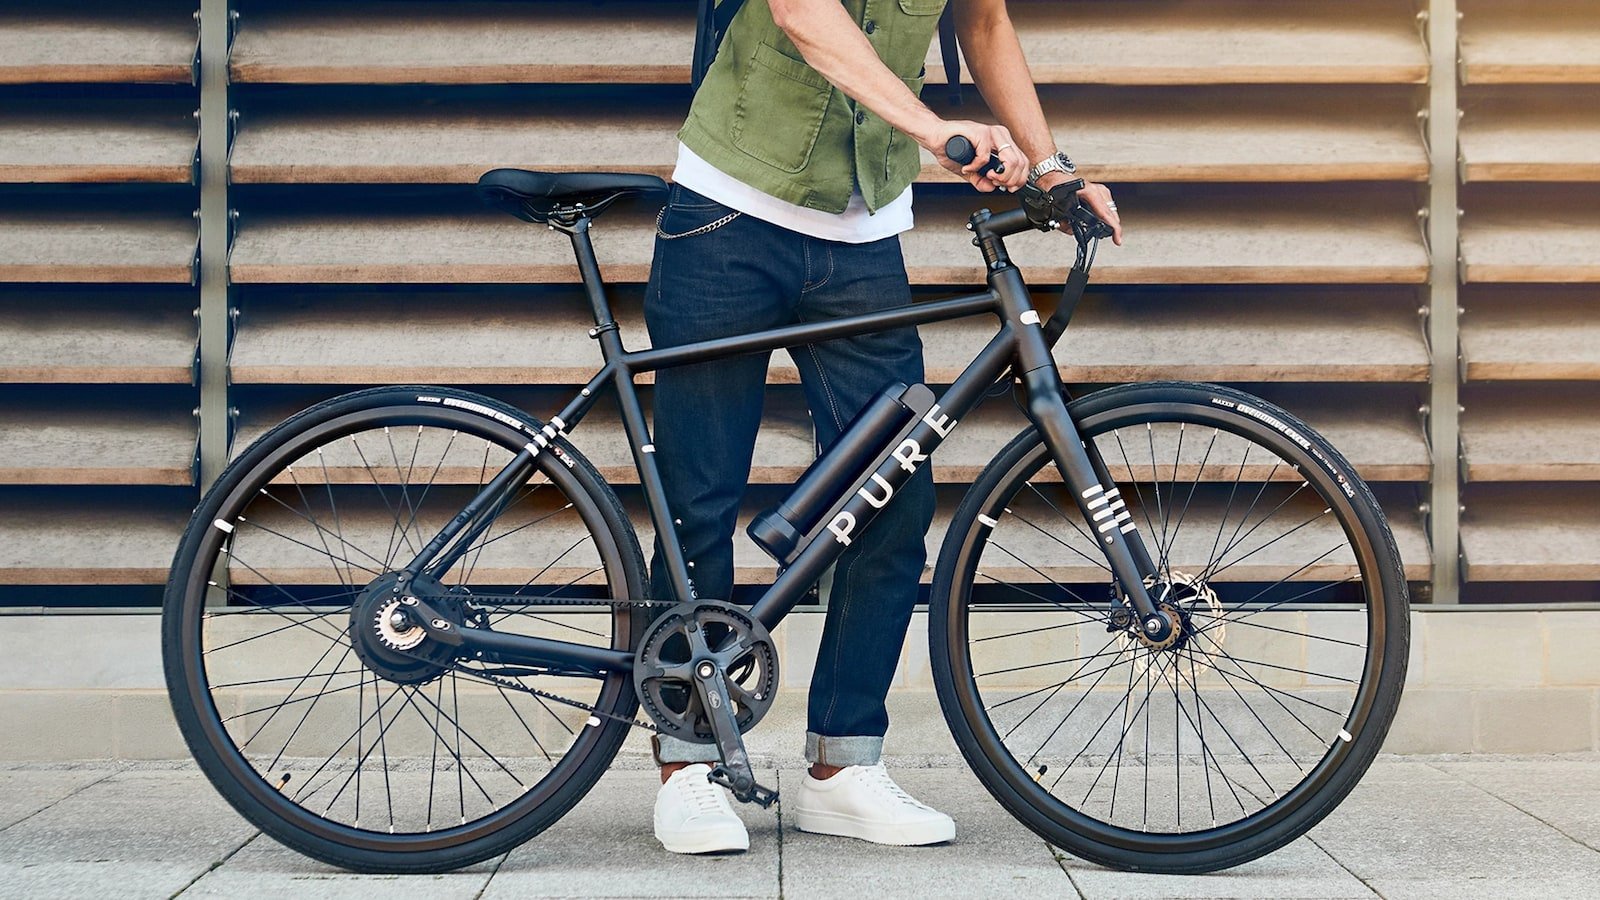 Pure Flux One hybrid eBike has a 25-mile range and remains lightweight at just 17.5 kg